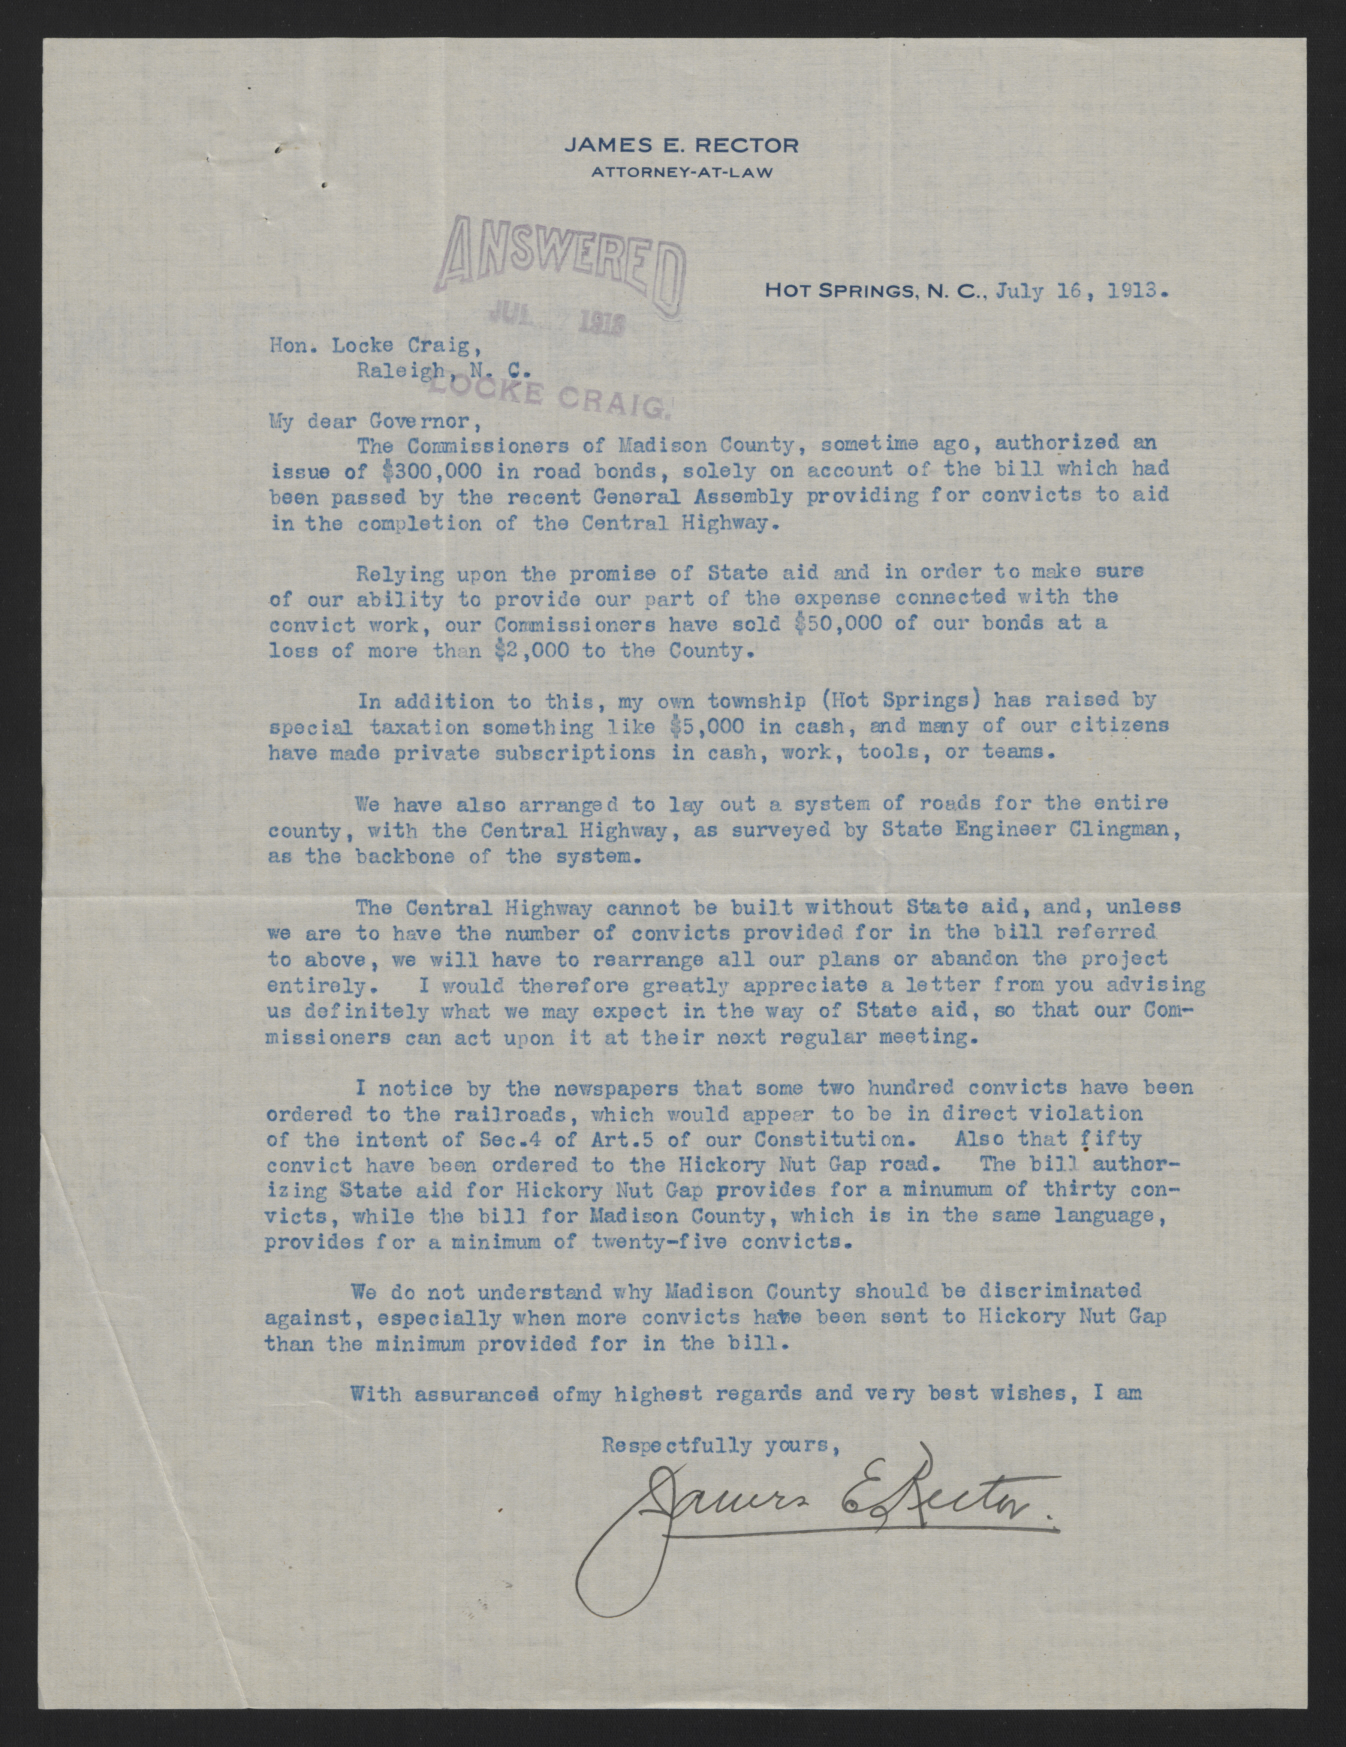 Letter from Rector to Craig, July 16, 1913